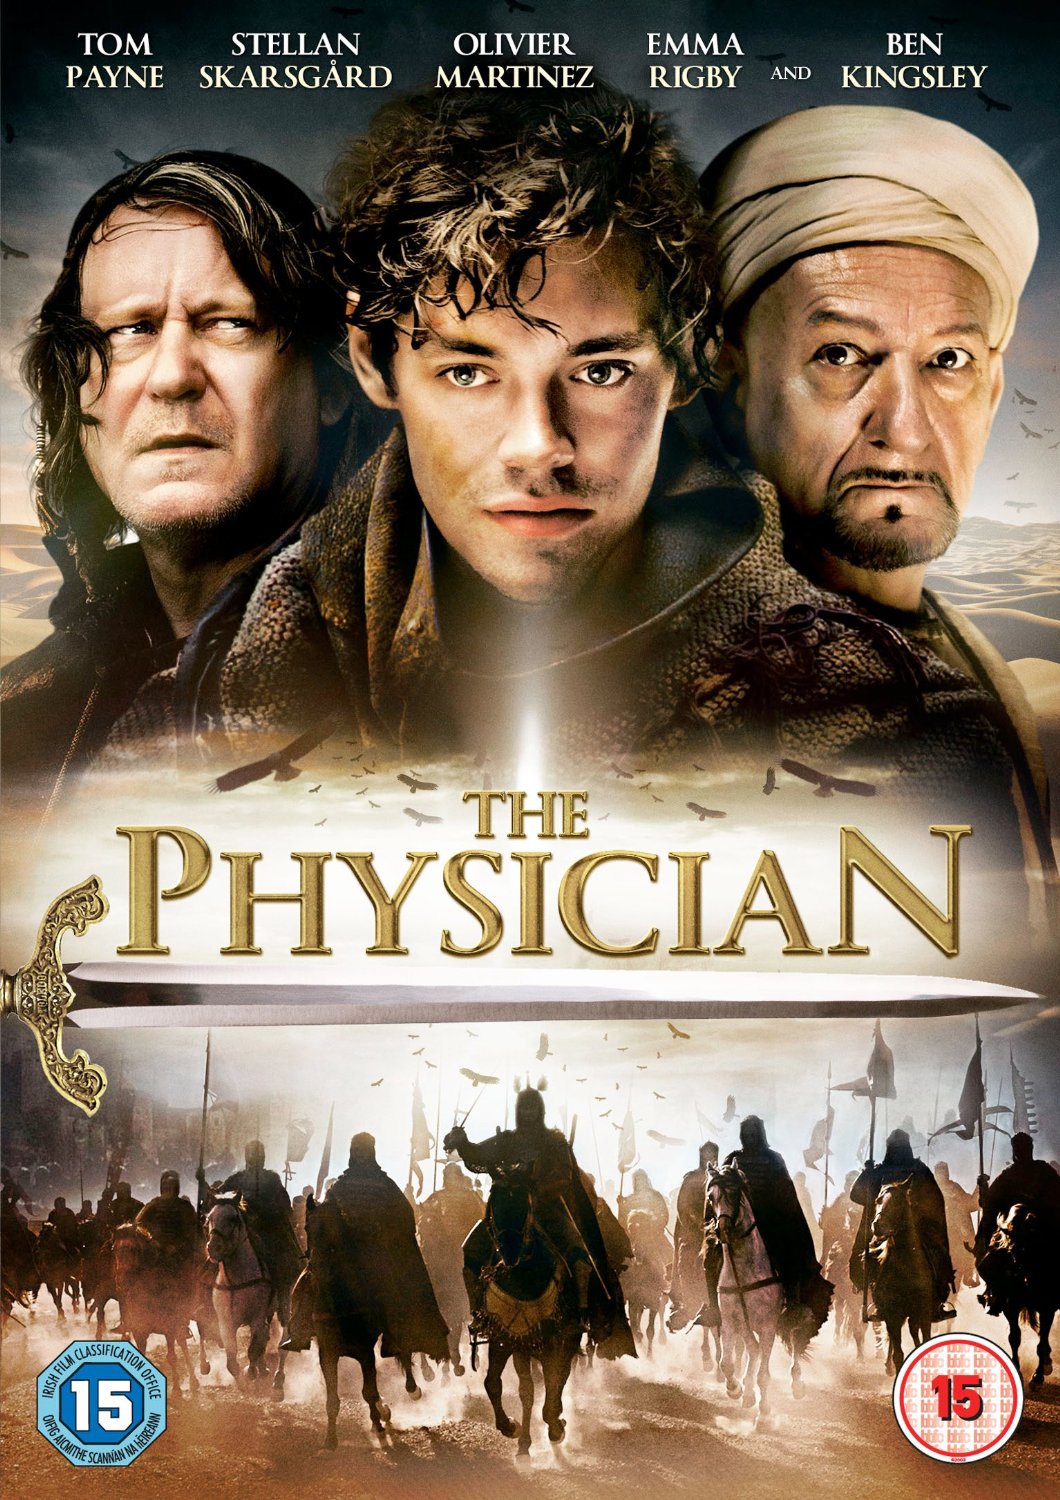 The Physician #1